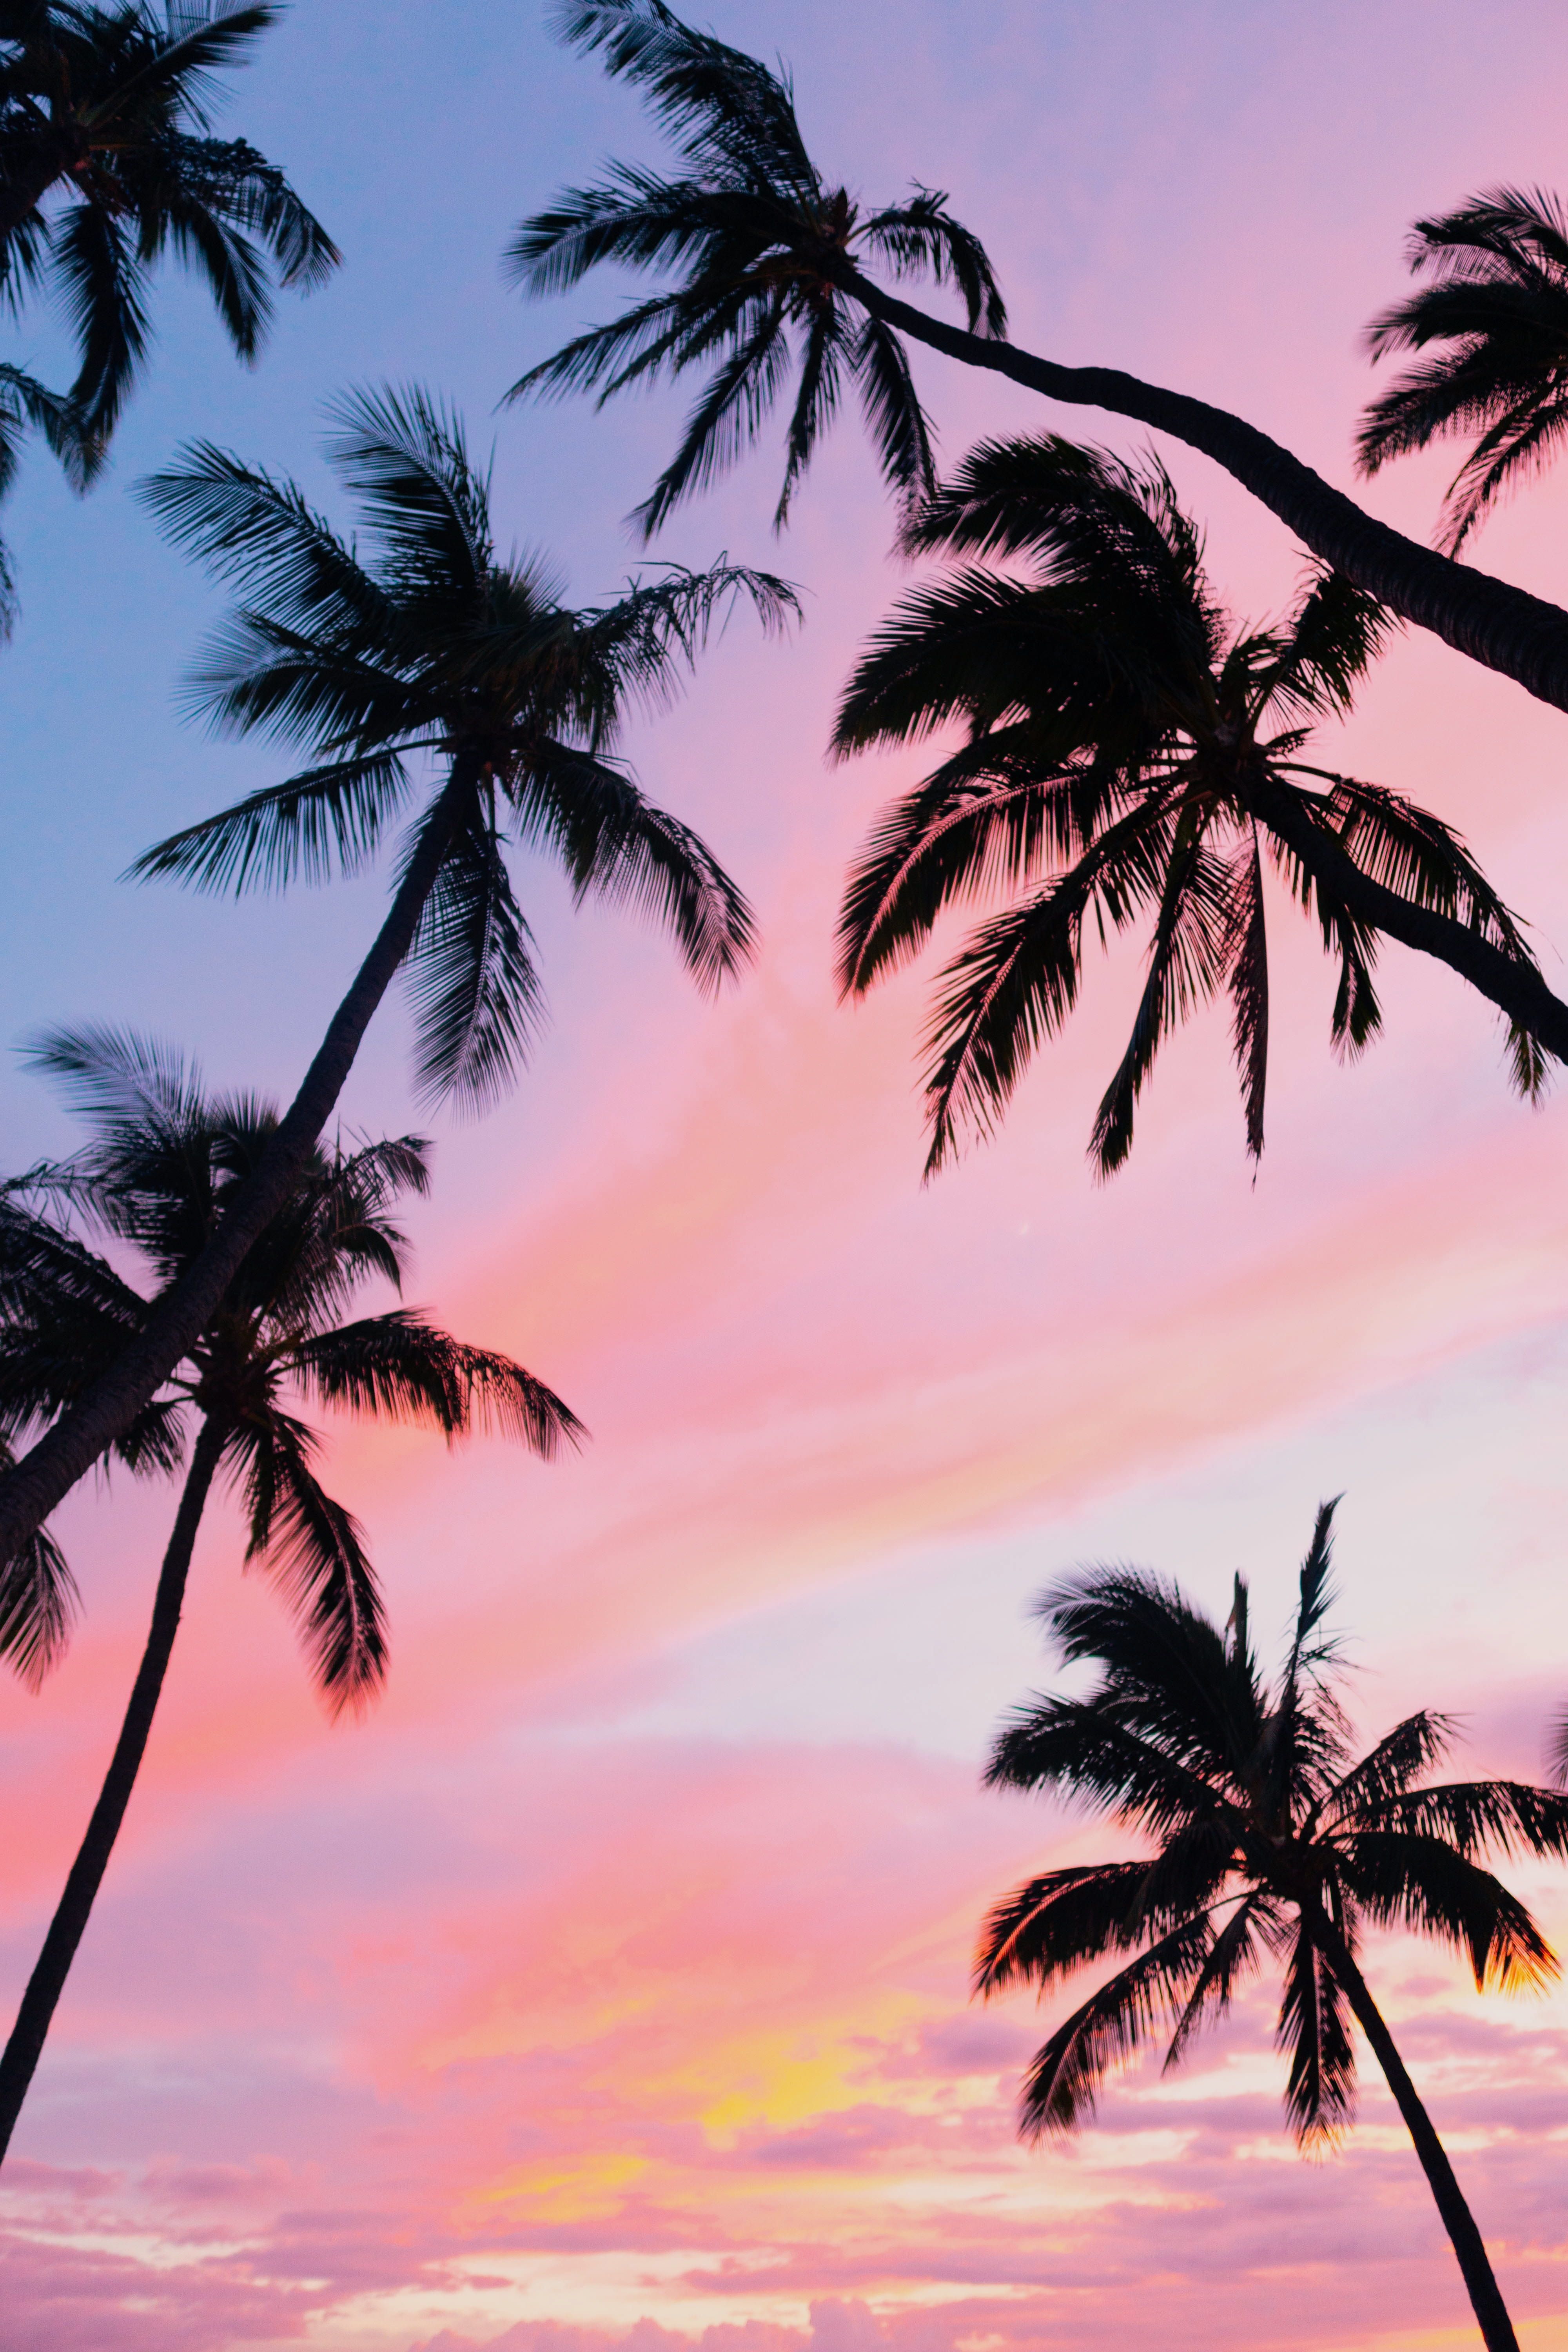 A photo of palm trees in front of a pink and purple sunset - Hawaii, palm tree